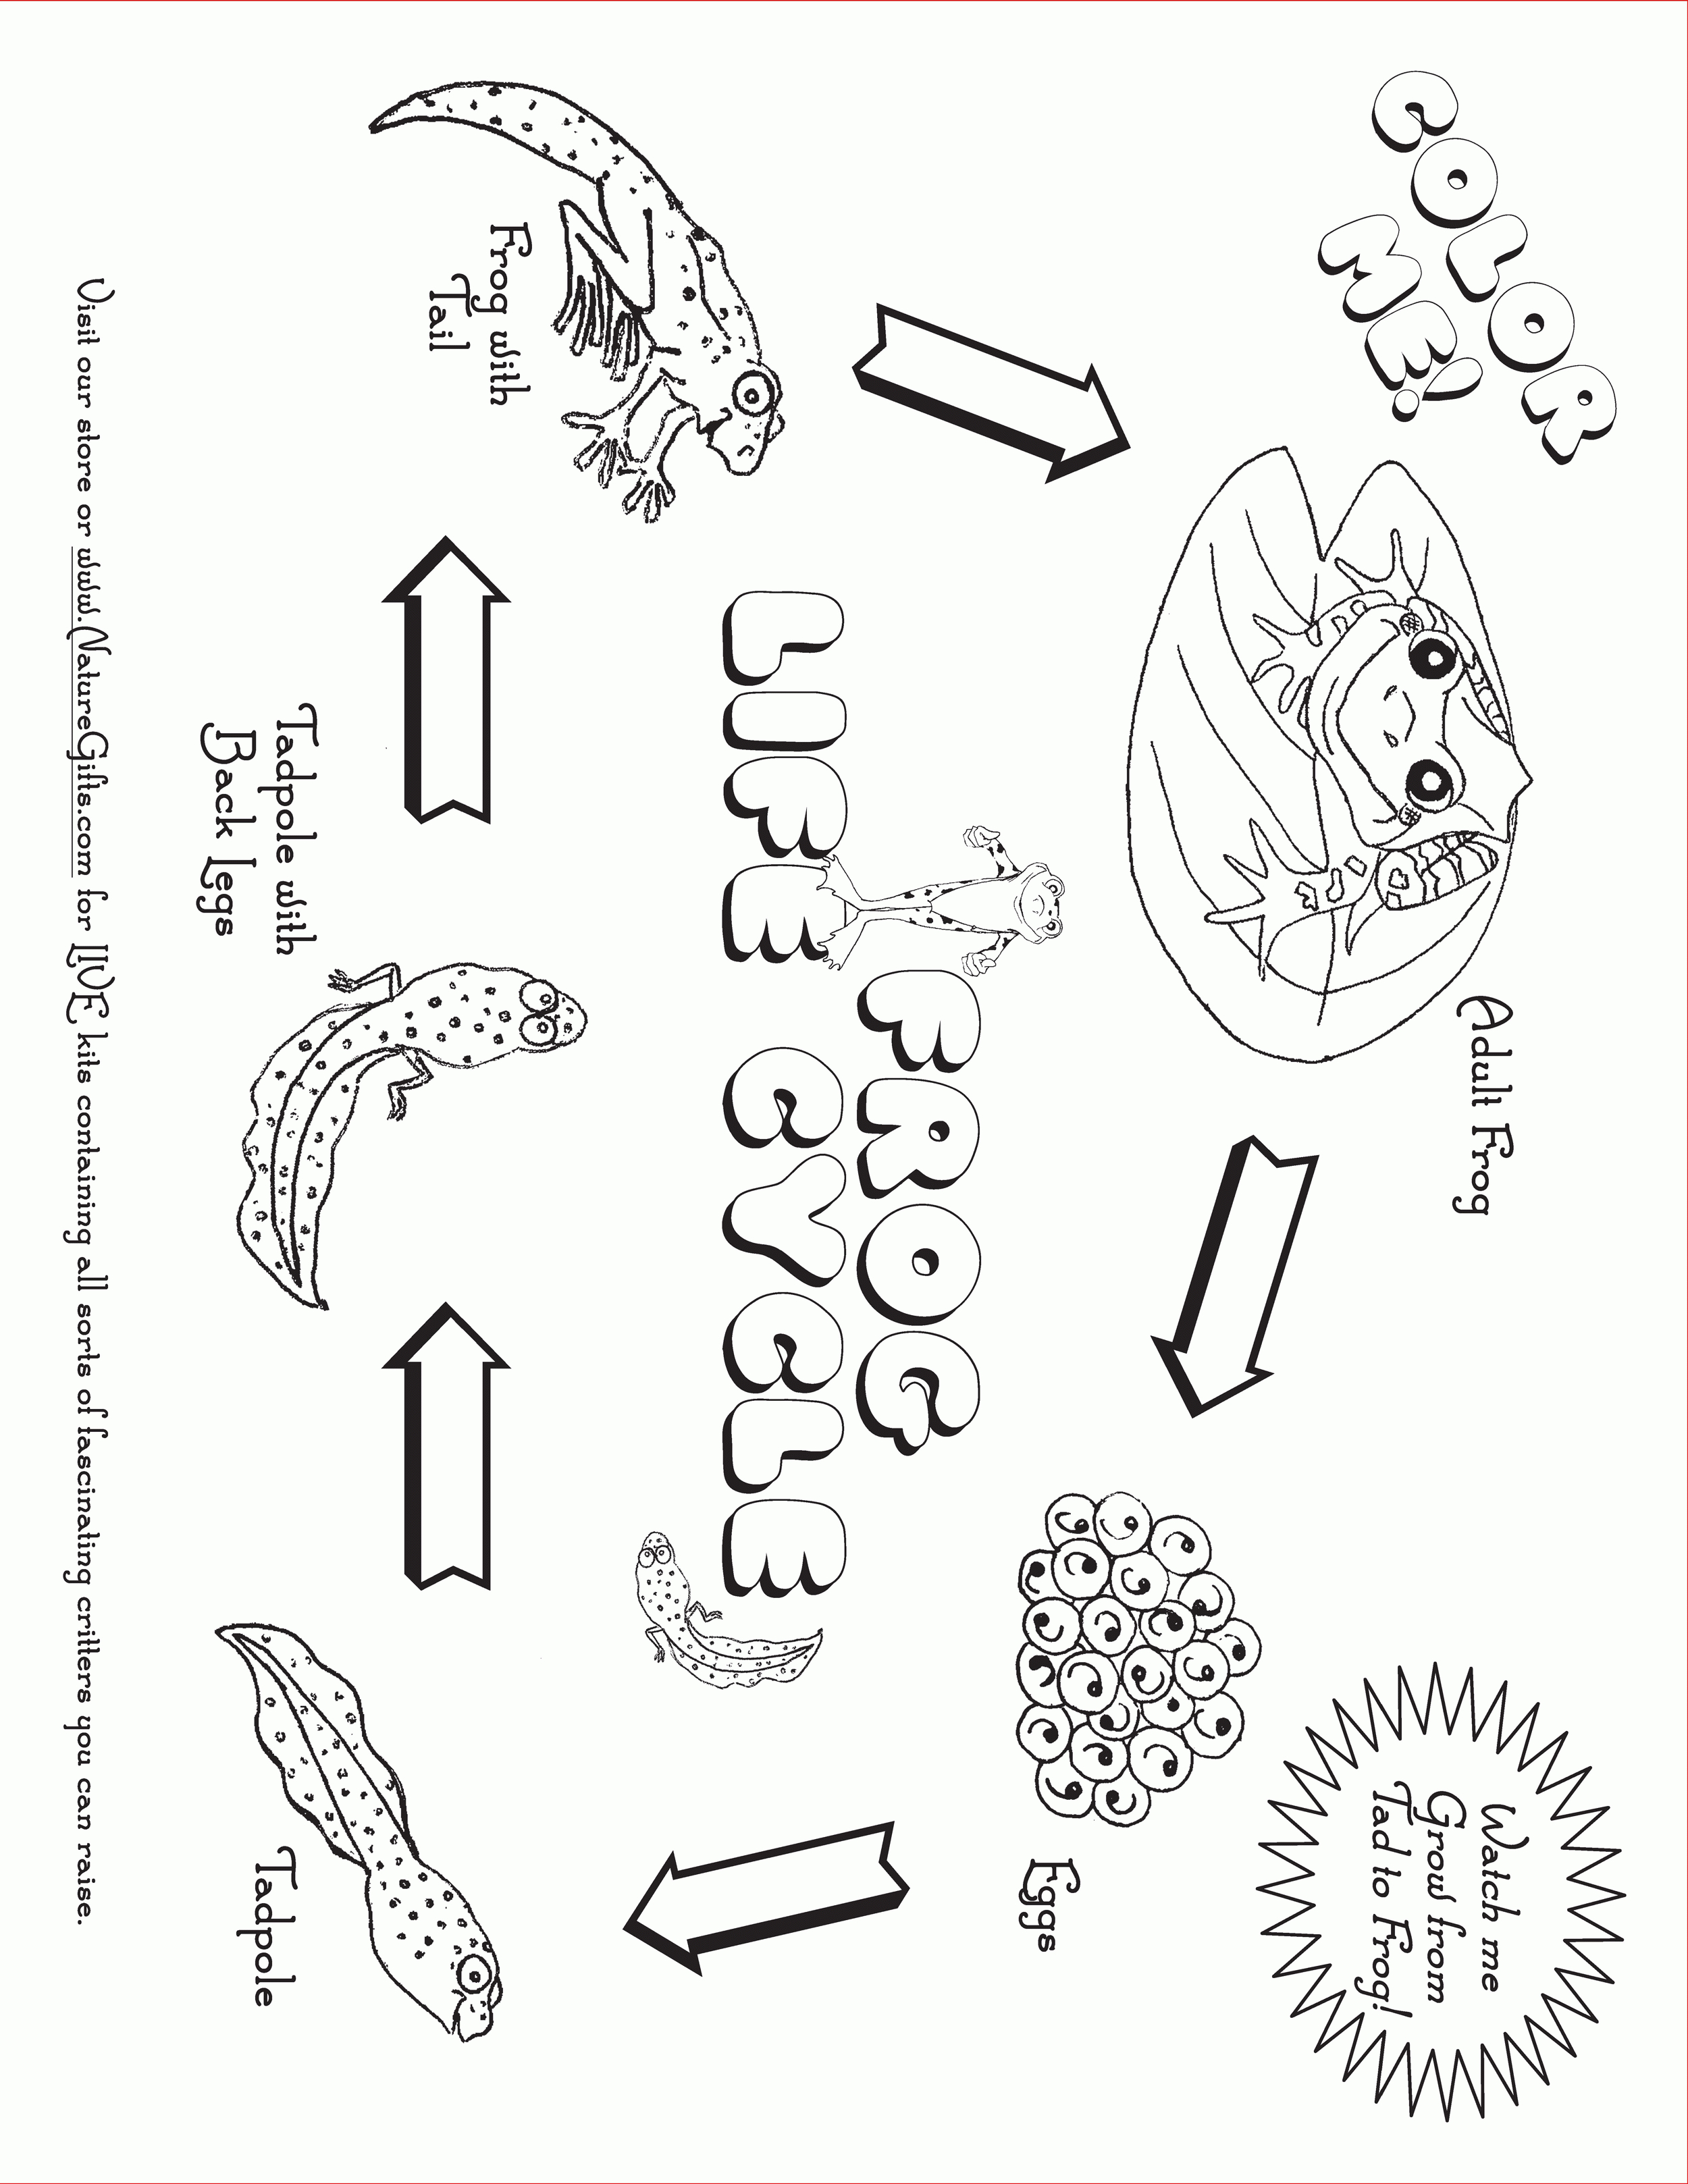 Free Frog Coloring Pages To Print Out And Color! | 4Th Grade - Life Cycle Of A Frog Free Printable Book